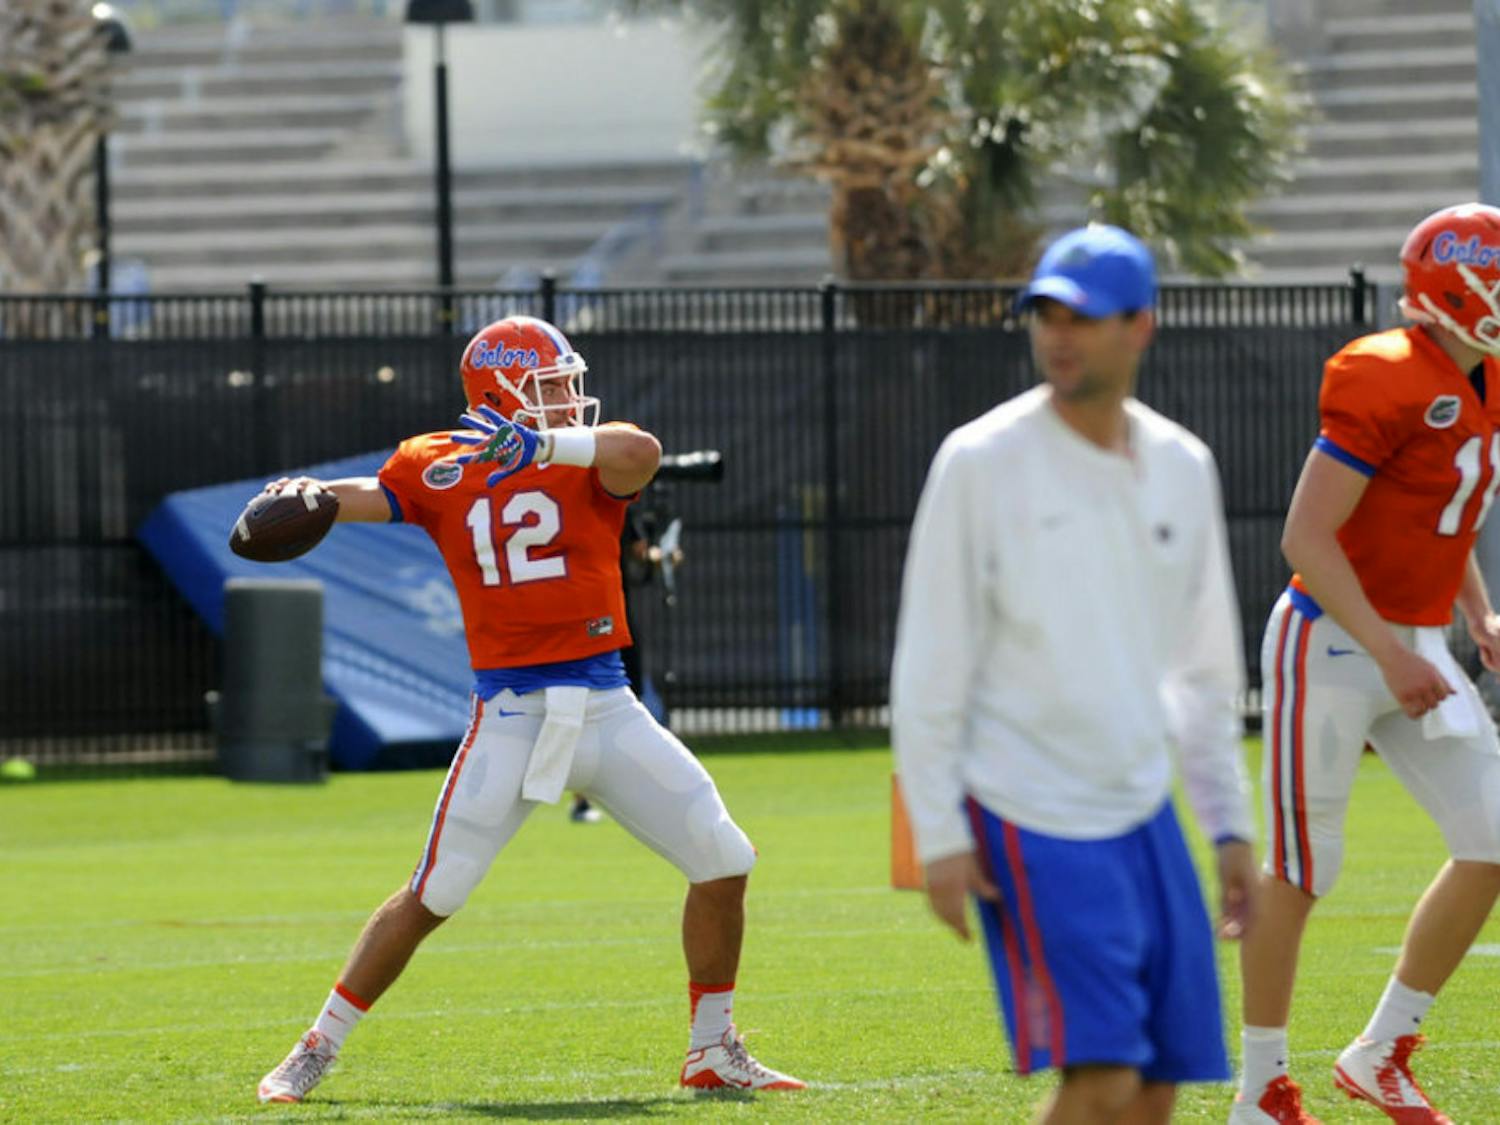 Florida quarterback Austin Appleby throws a pass&nbsp;during a Spring practice on March 16, 2016, at the Sanders Practice Fields.&nbsp;